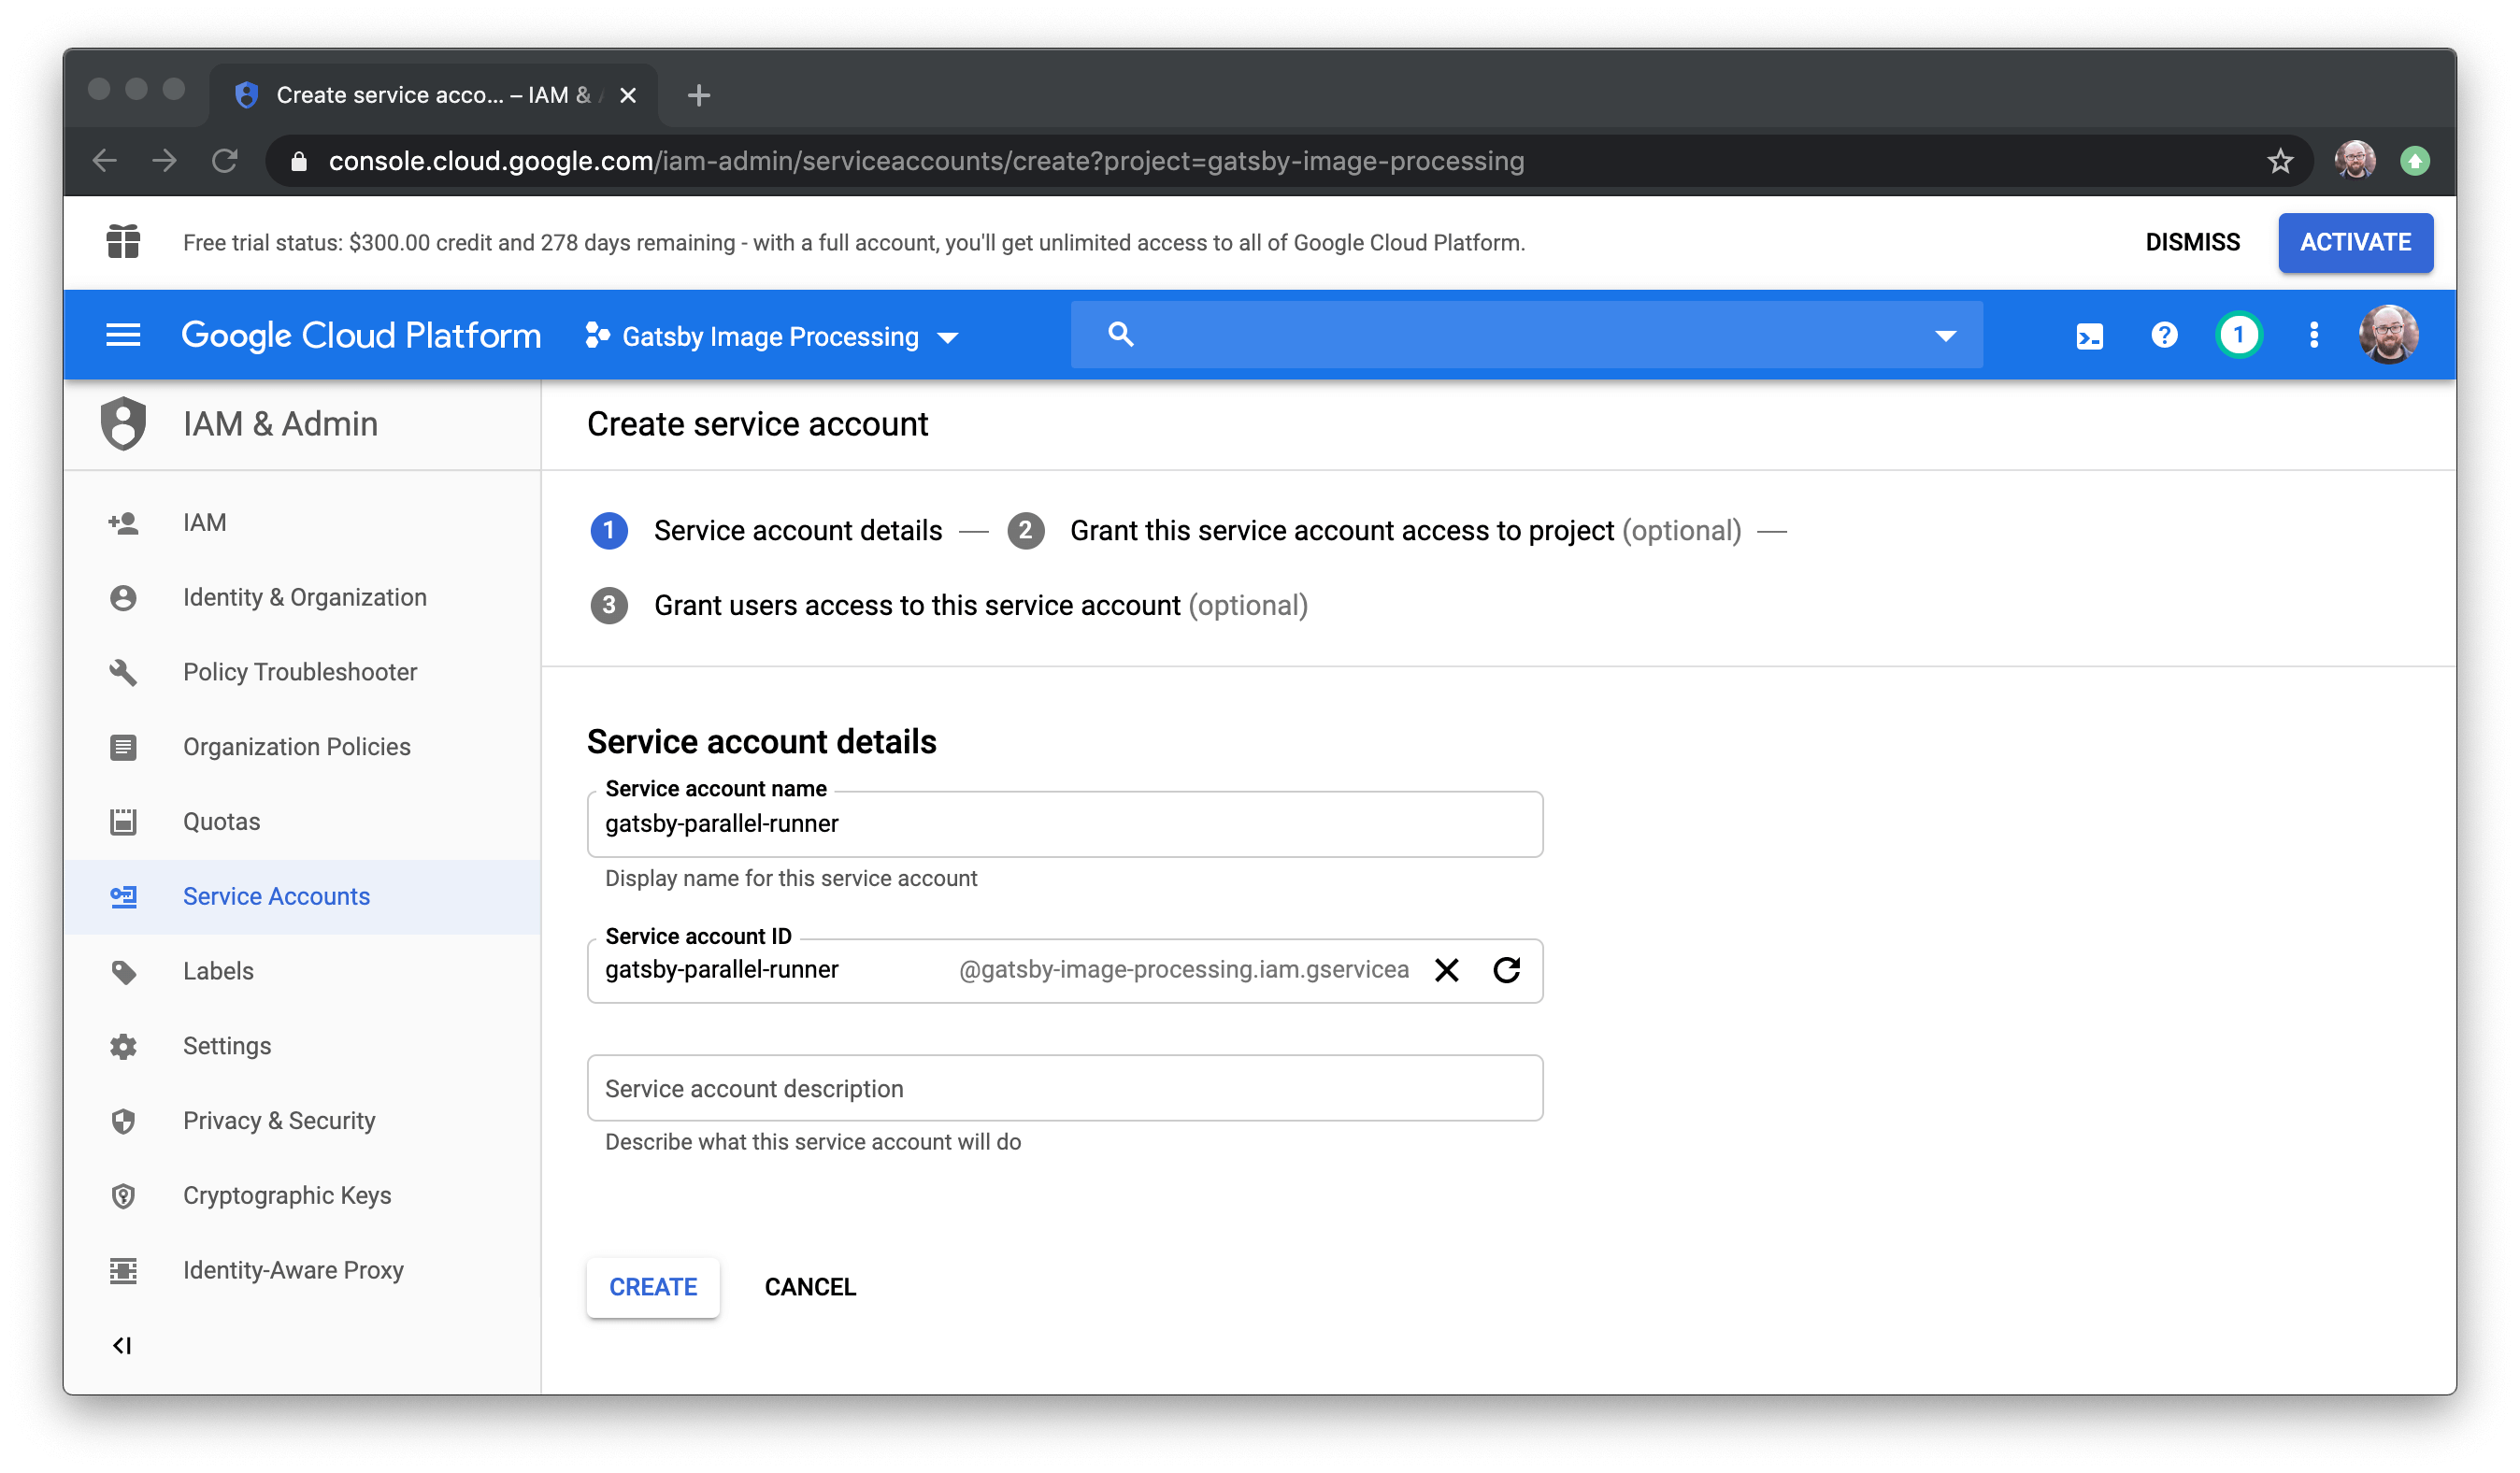 The create service account page in Google Cloud.